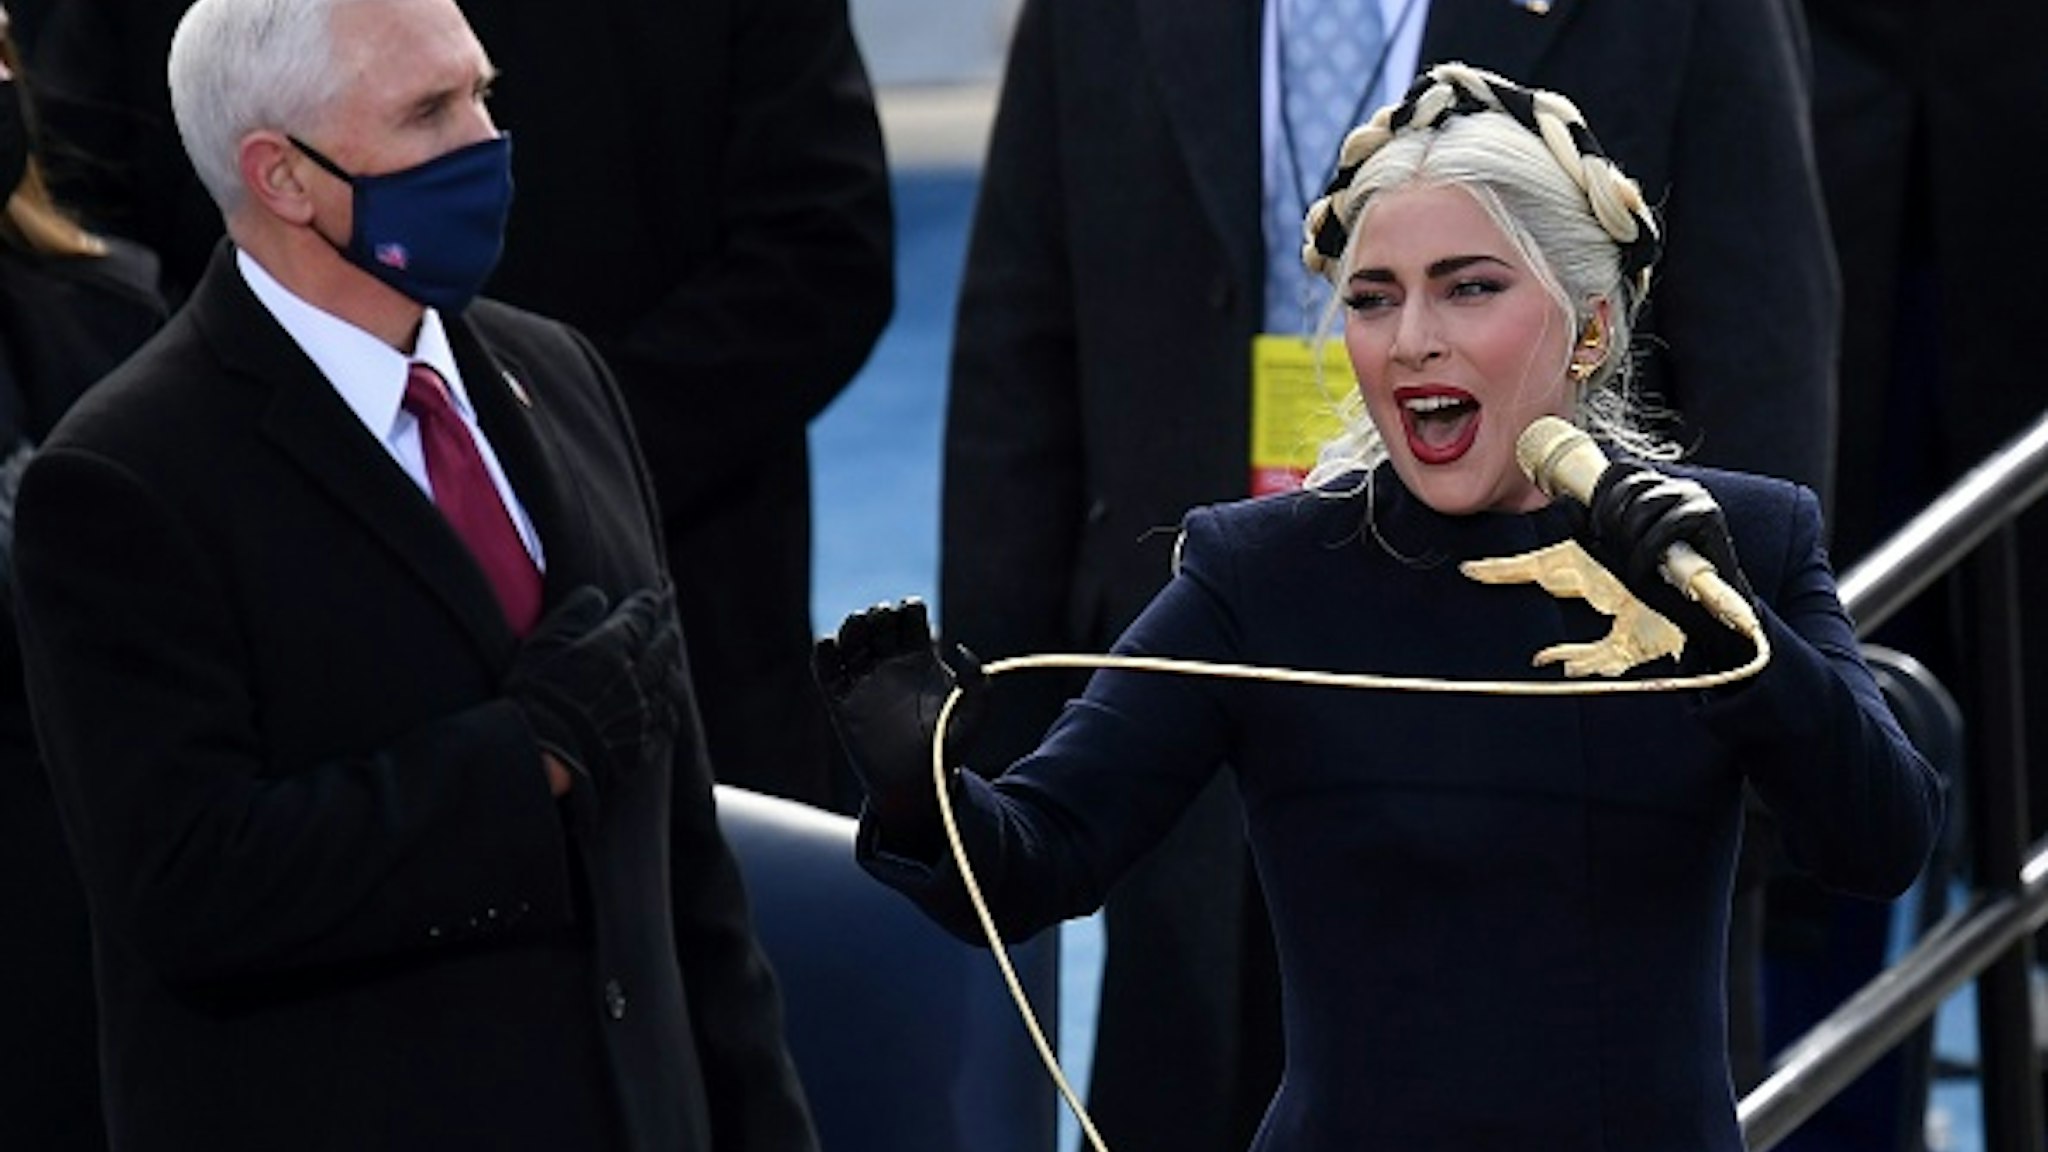 Lady Gaga sings the National Anthem at the inauguration of US President-elect Joe Biden on the West Front of the US Capitol on January 20, 2021 in Washington, DC. - During today's inauguration ceremony Joe Biden becomes the 46th president of the United States.